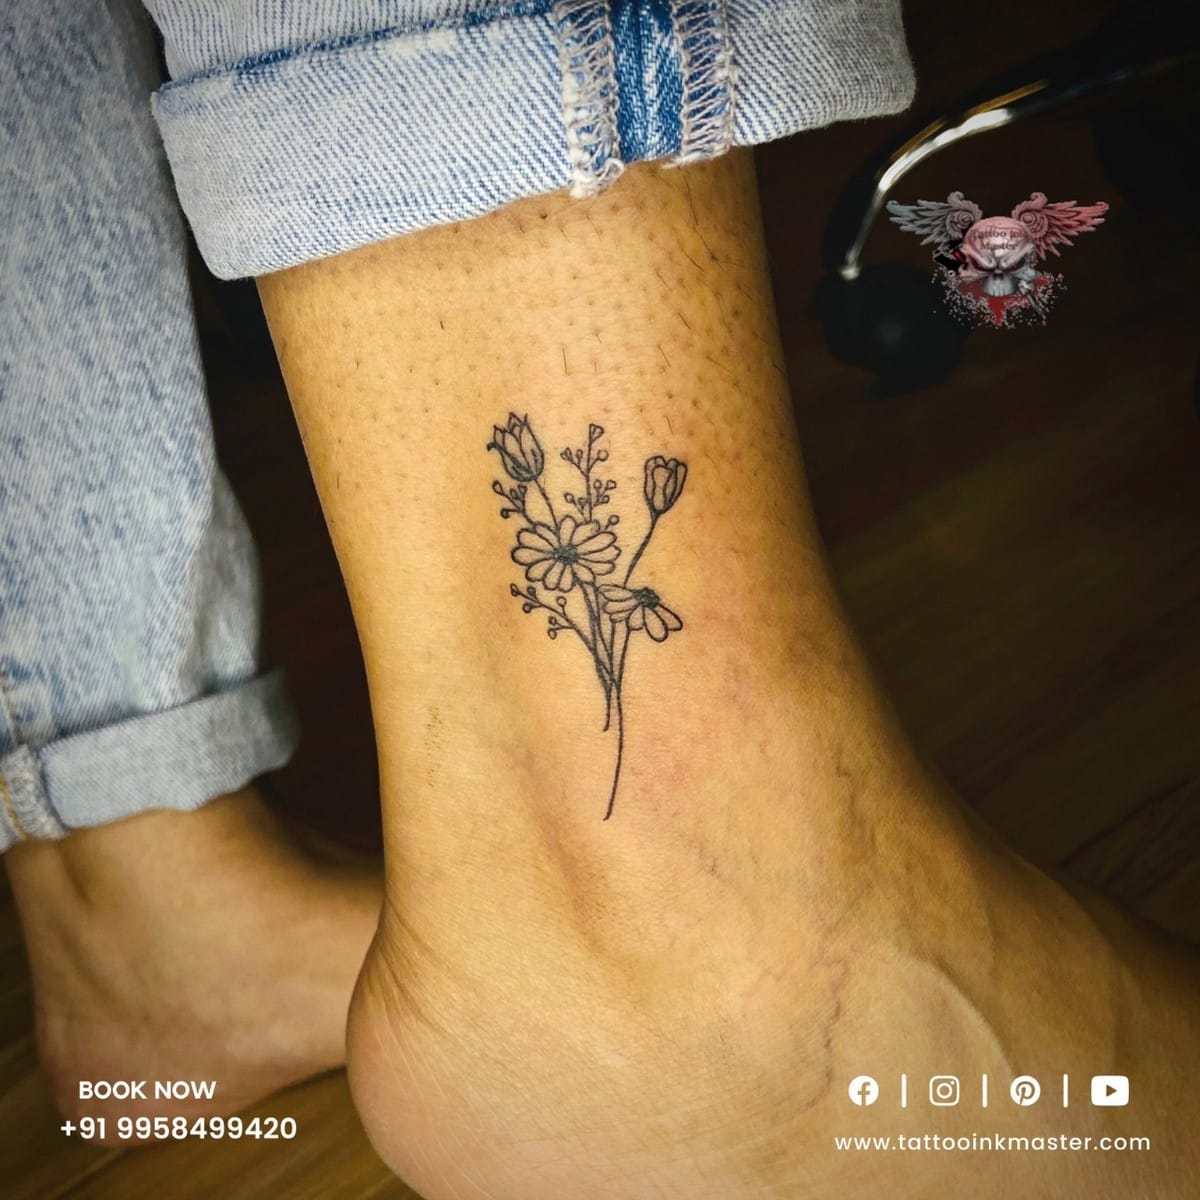 Micro-realistic daisy flower tattoo located on the